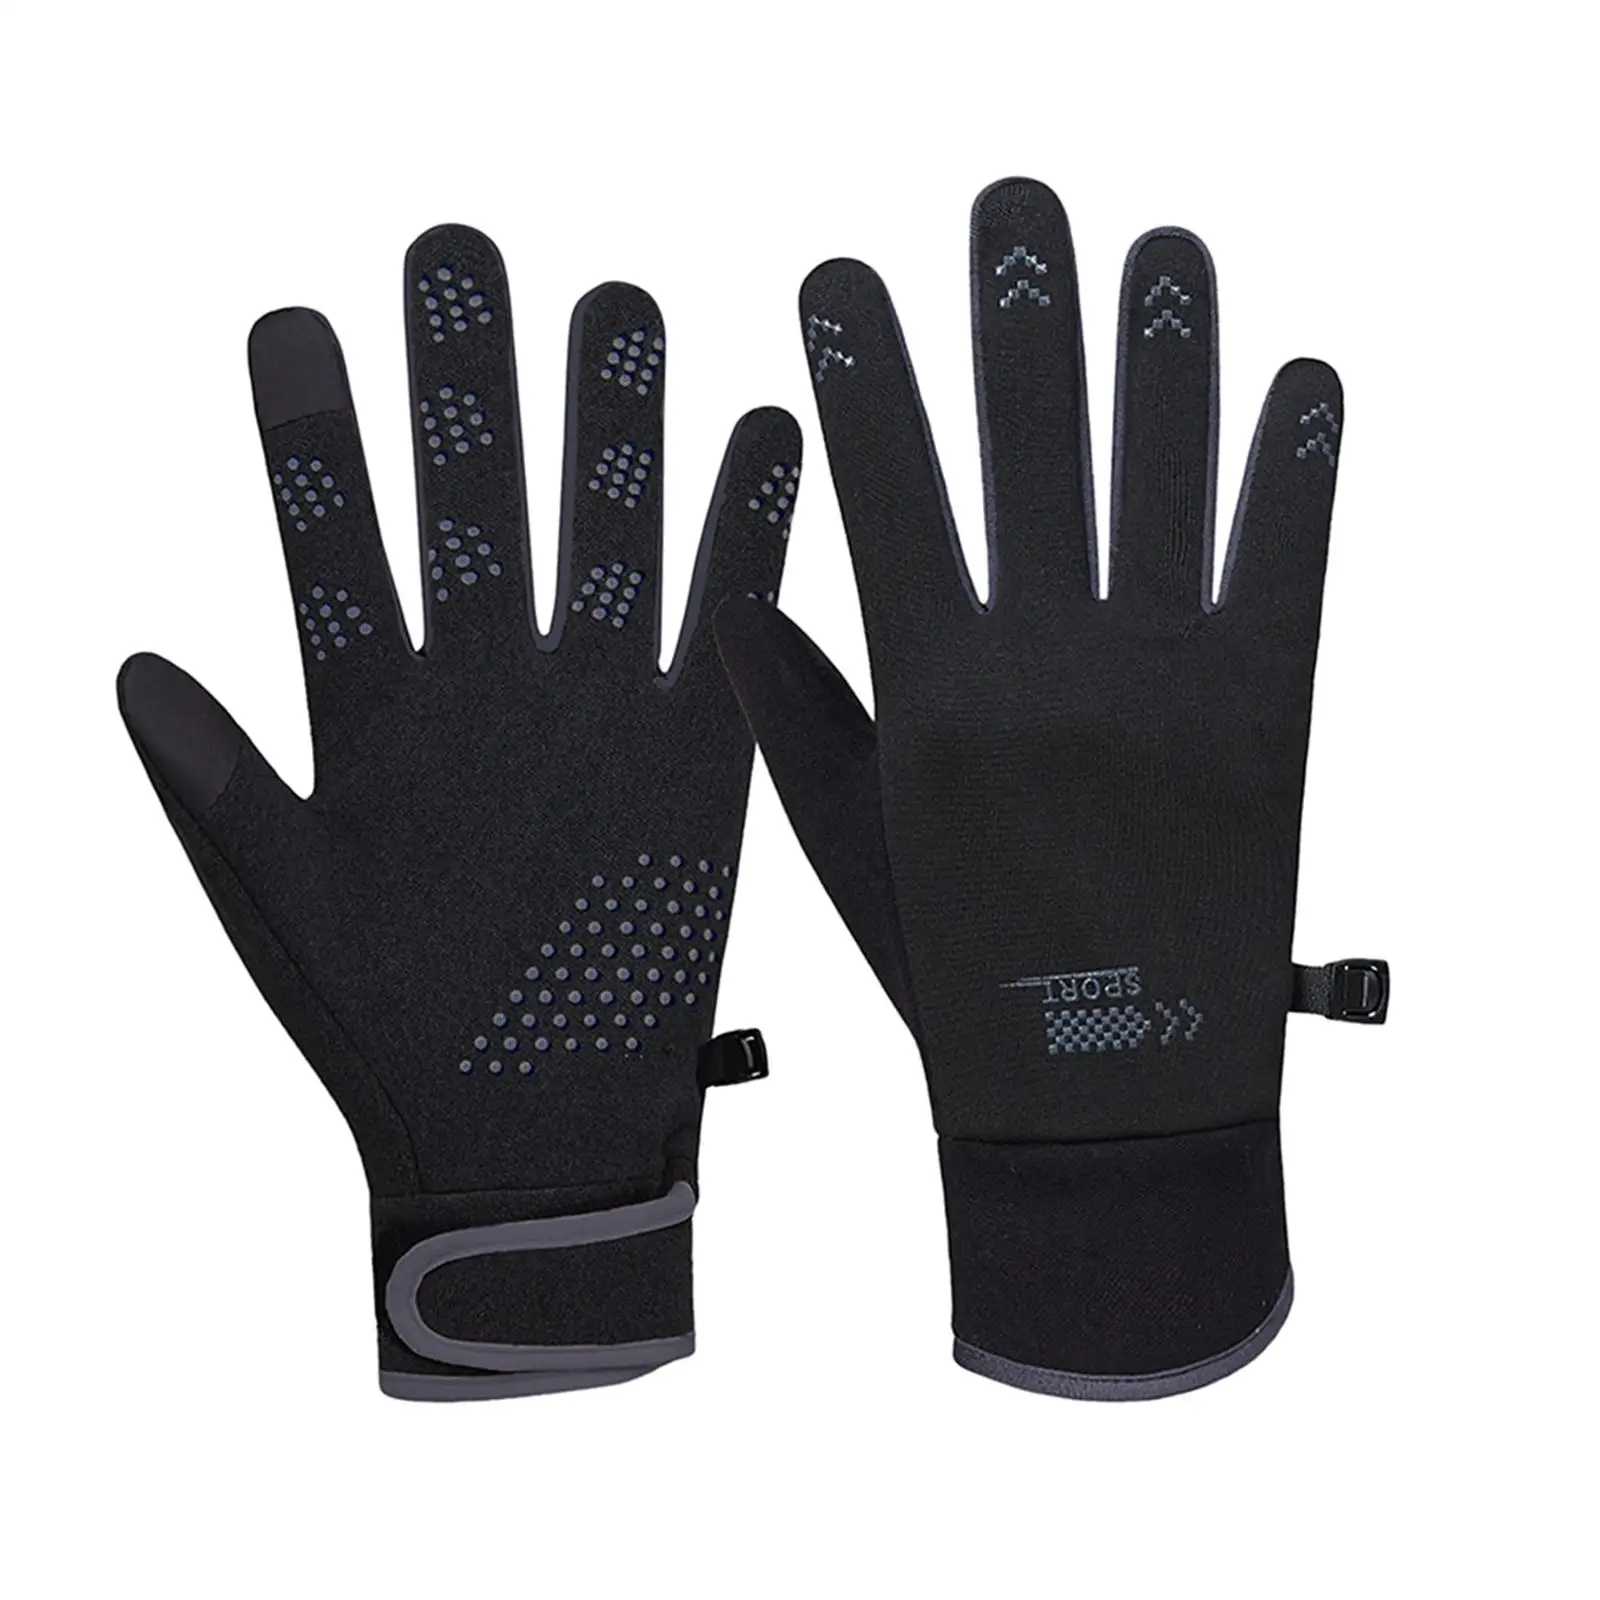 Winter Ski Gloves Touch Screen Gift Touchscreen Cold Weather Snow Gloves Cycling Gloves for Riding Outdoor Skiing Skating Snow